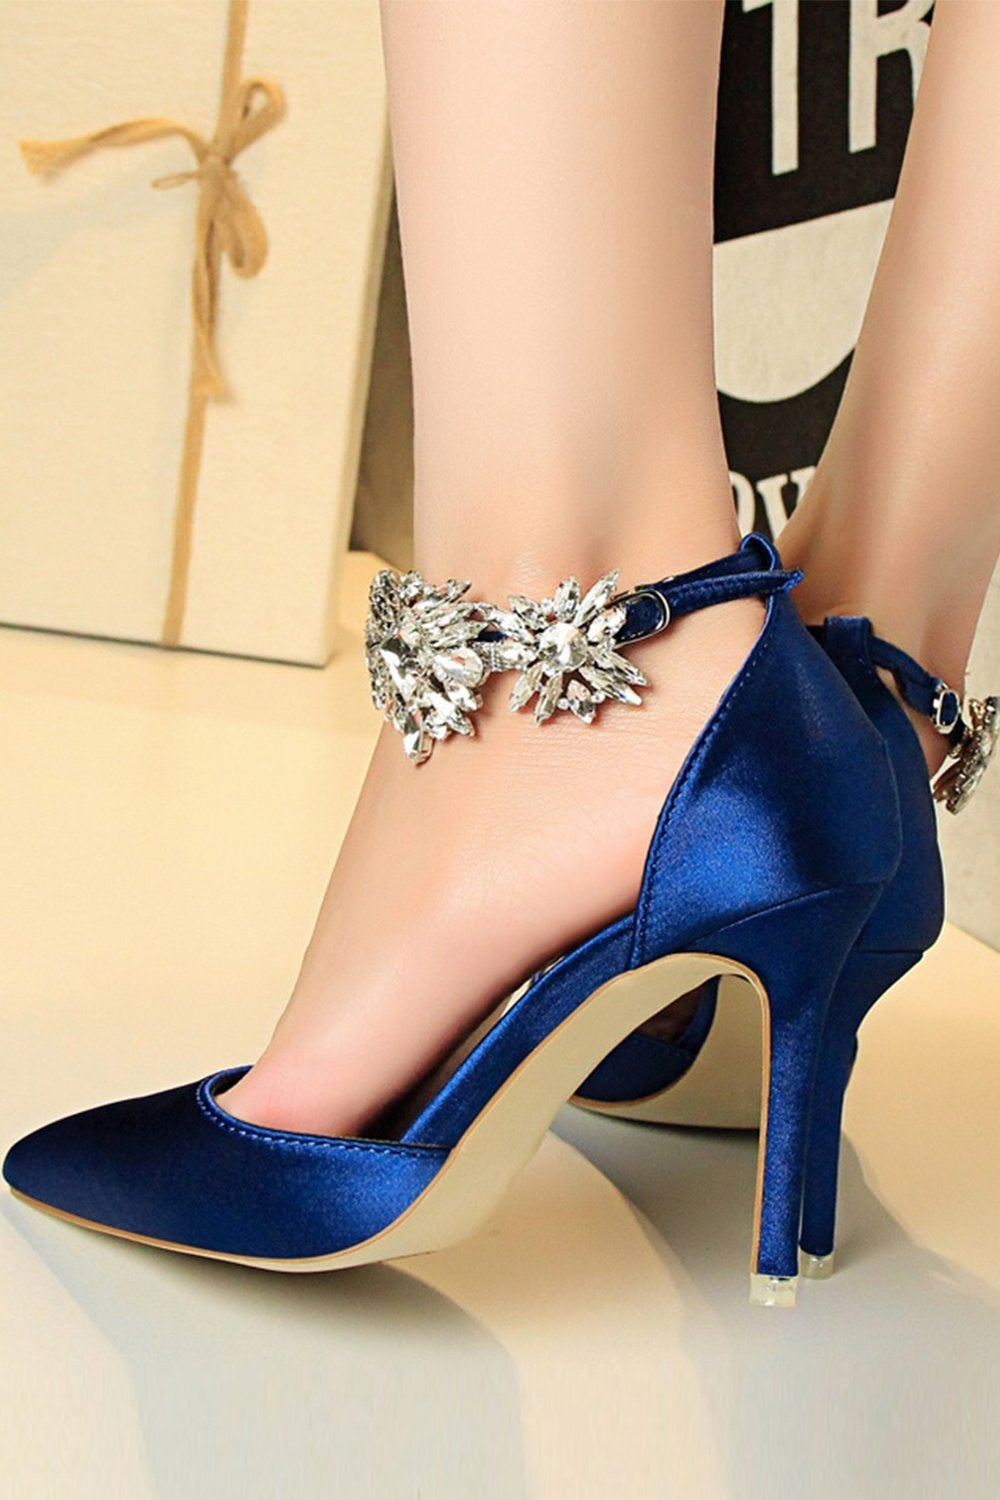 Women Sexy Platform Heels Pumps Round Toe Prom Party Shoes Woman Large Size  | eBay